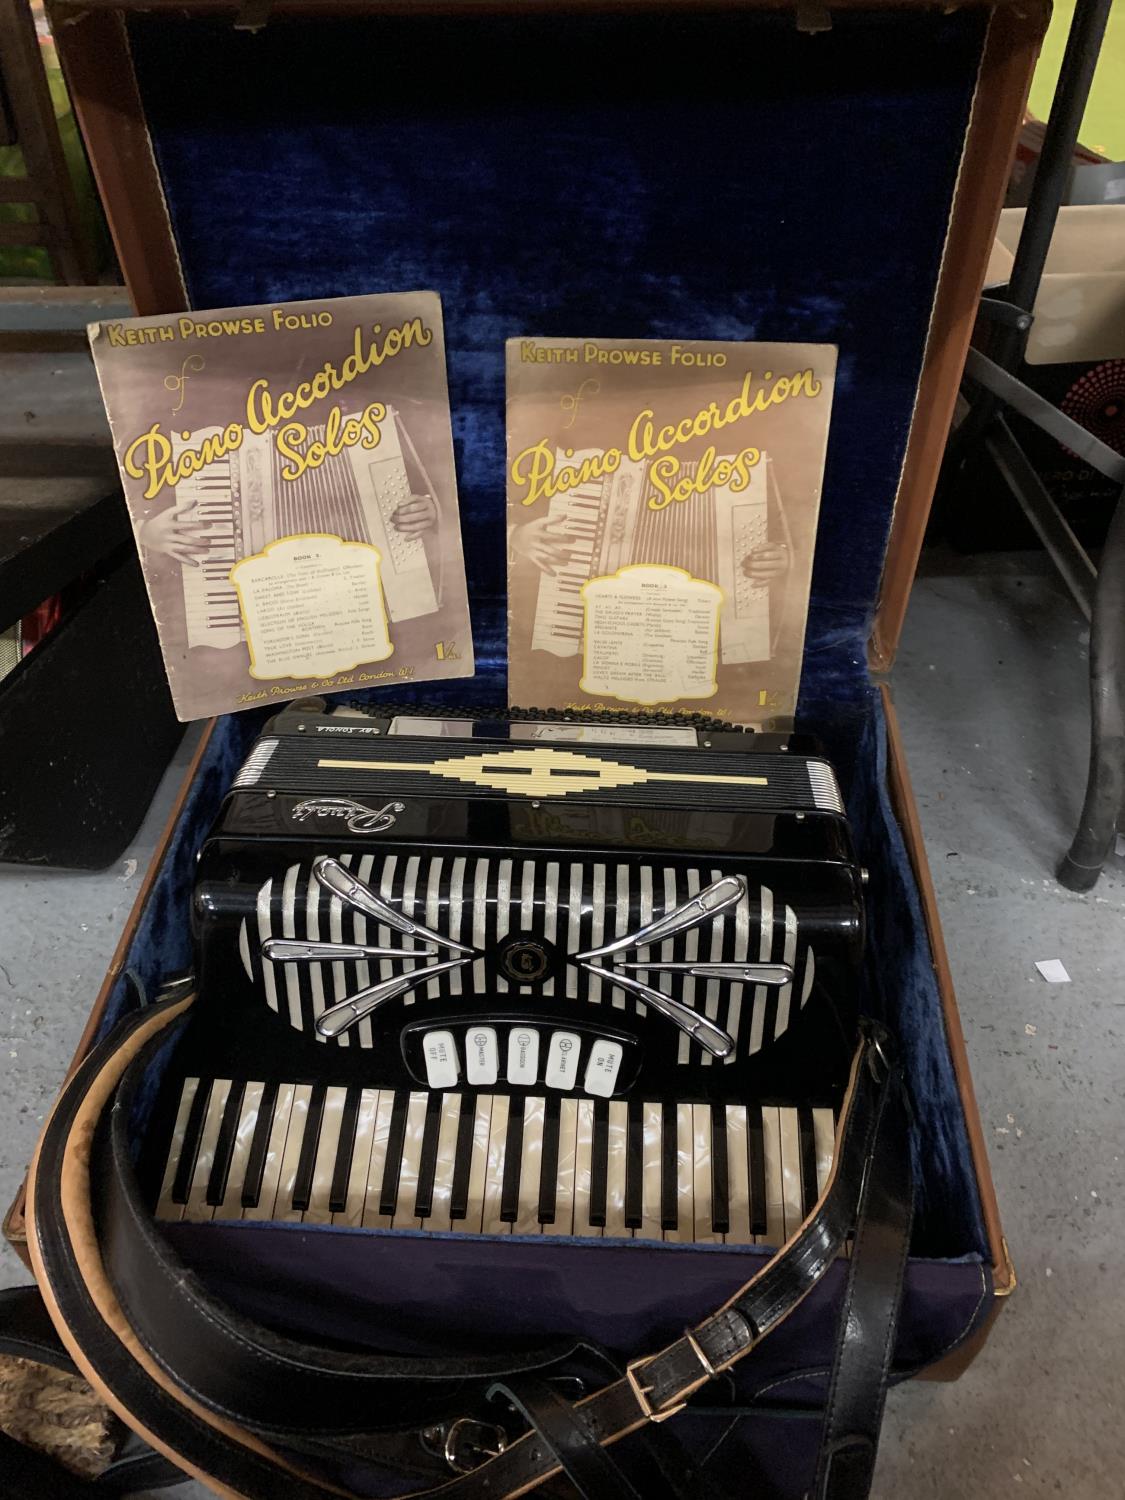 A VINTAGE ACCORDION IN A LEATHER EFFECT CARRY CASE